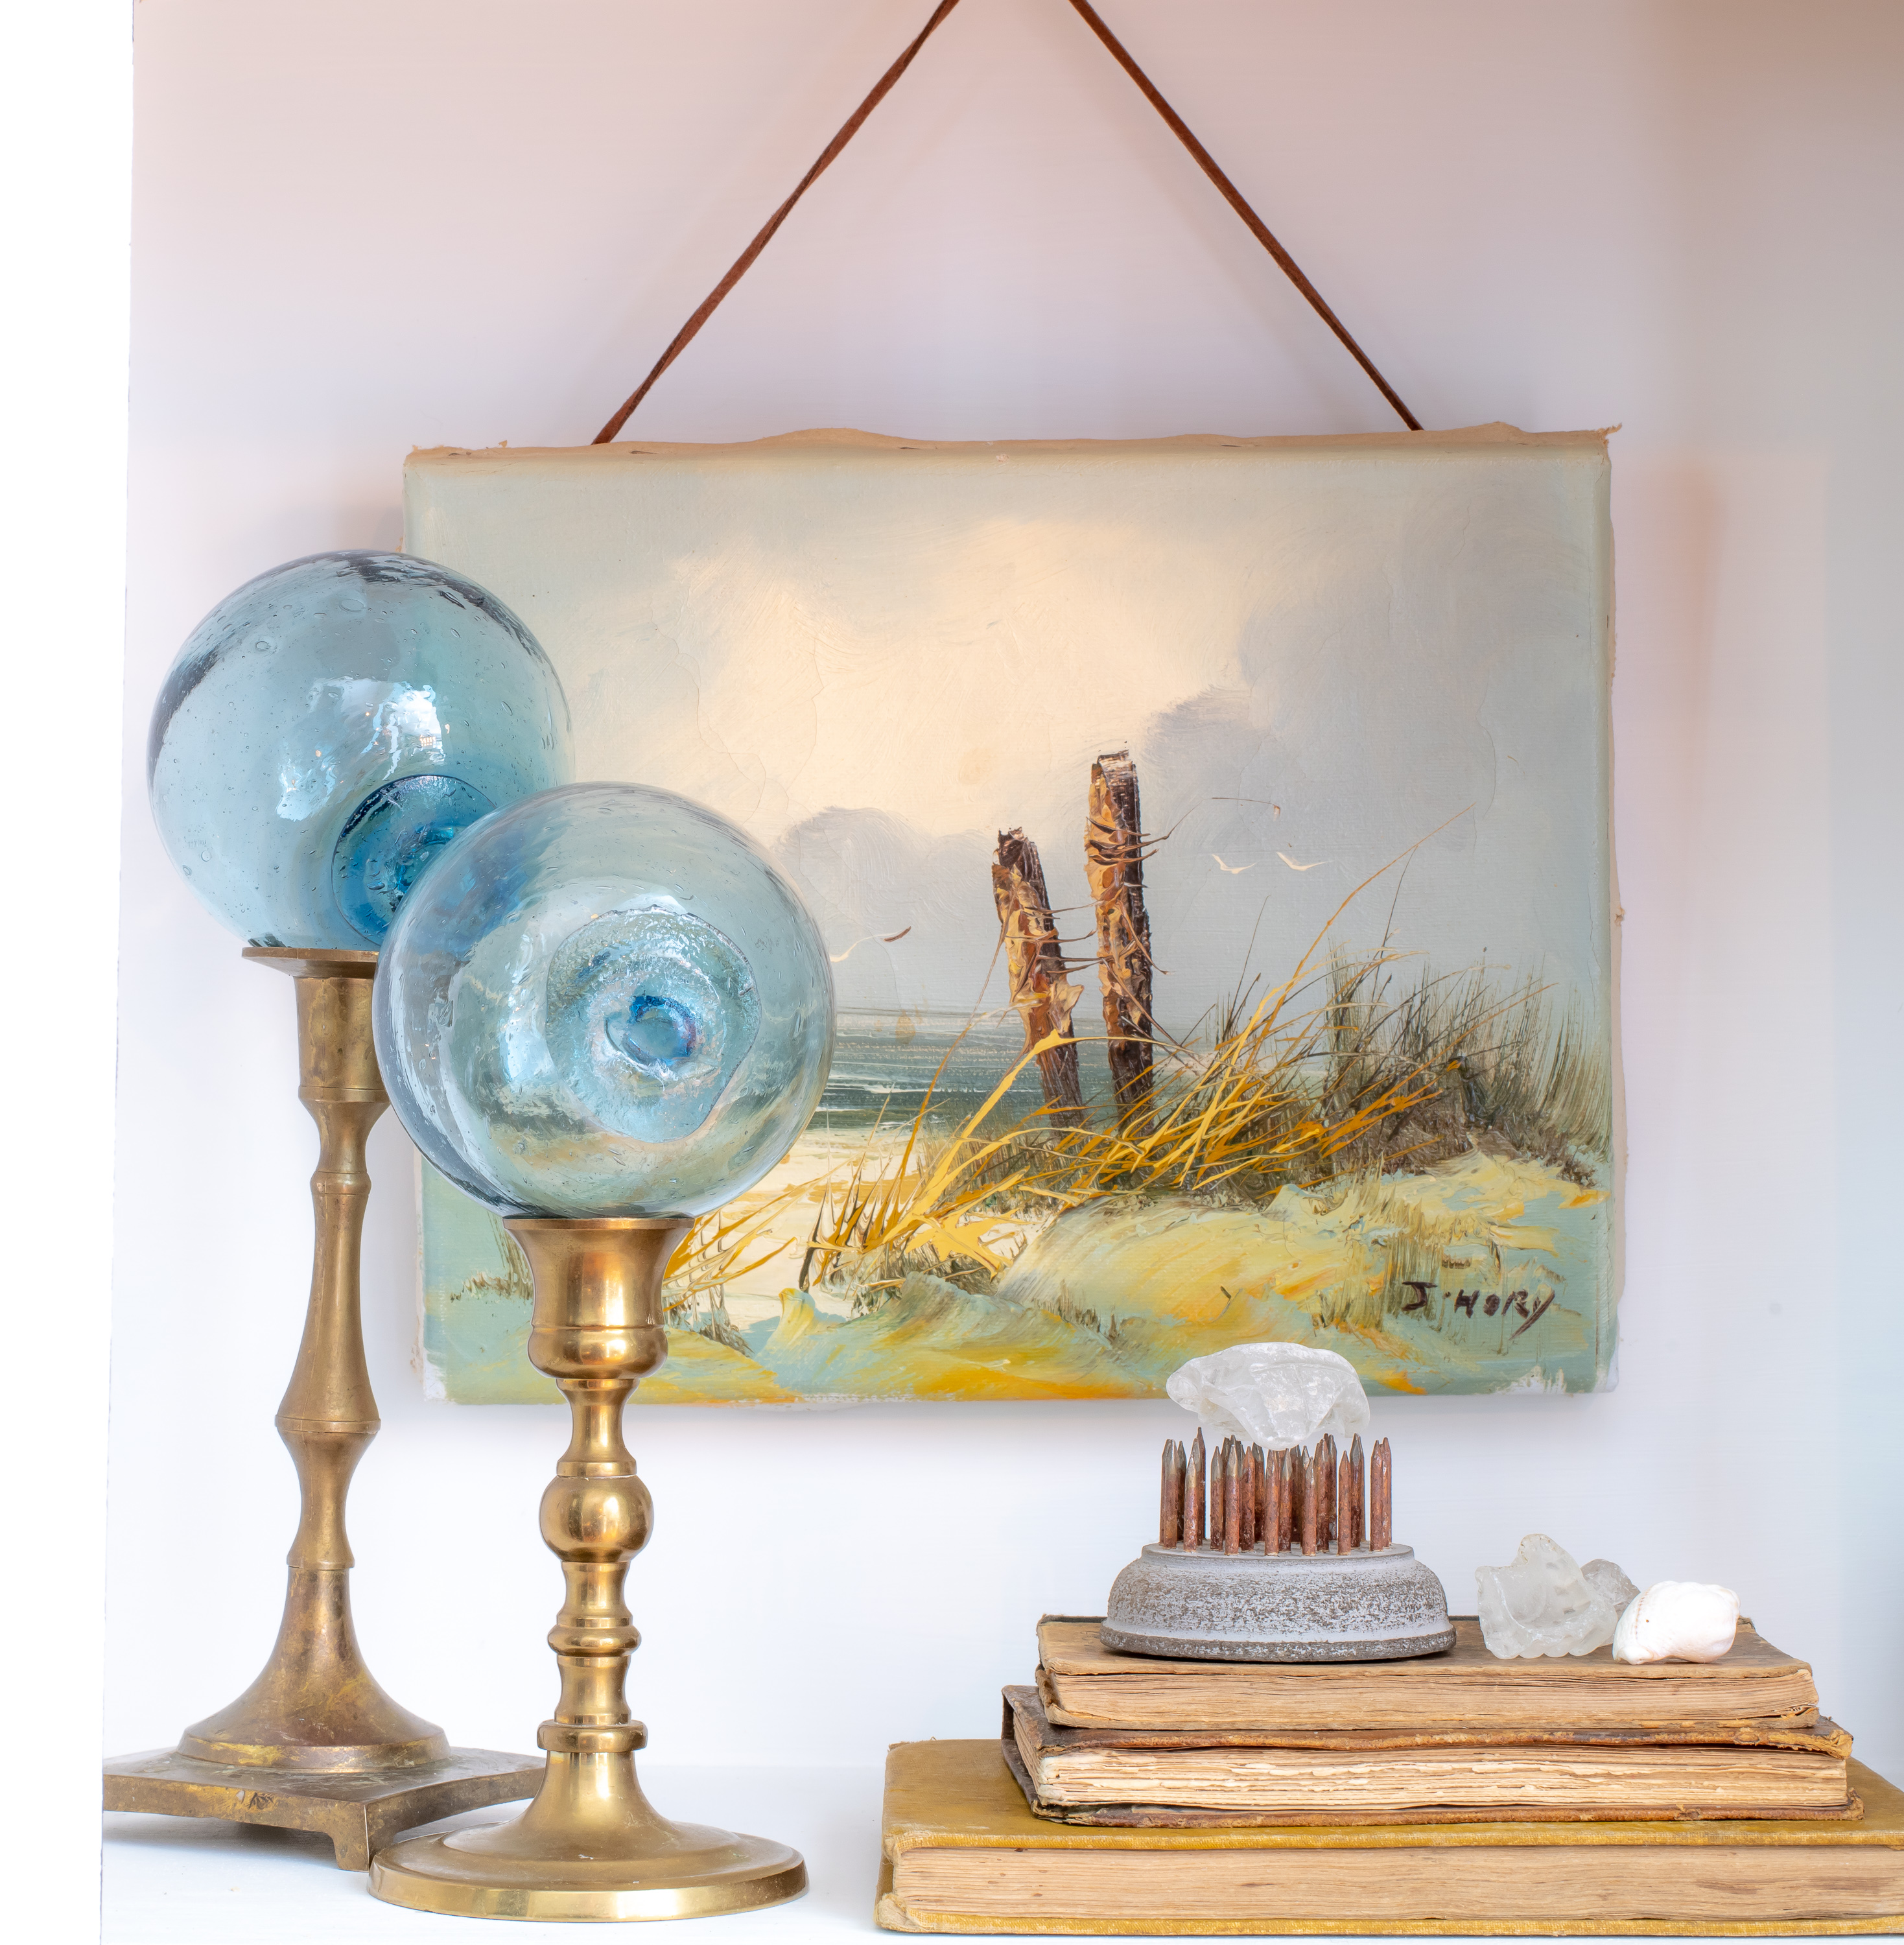 Seascape with treasured collections and memories | How to bring drama into your home without the DRAMA – cozy living | Vinyet Etc